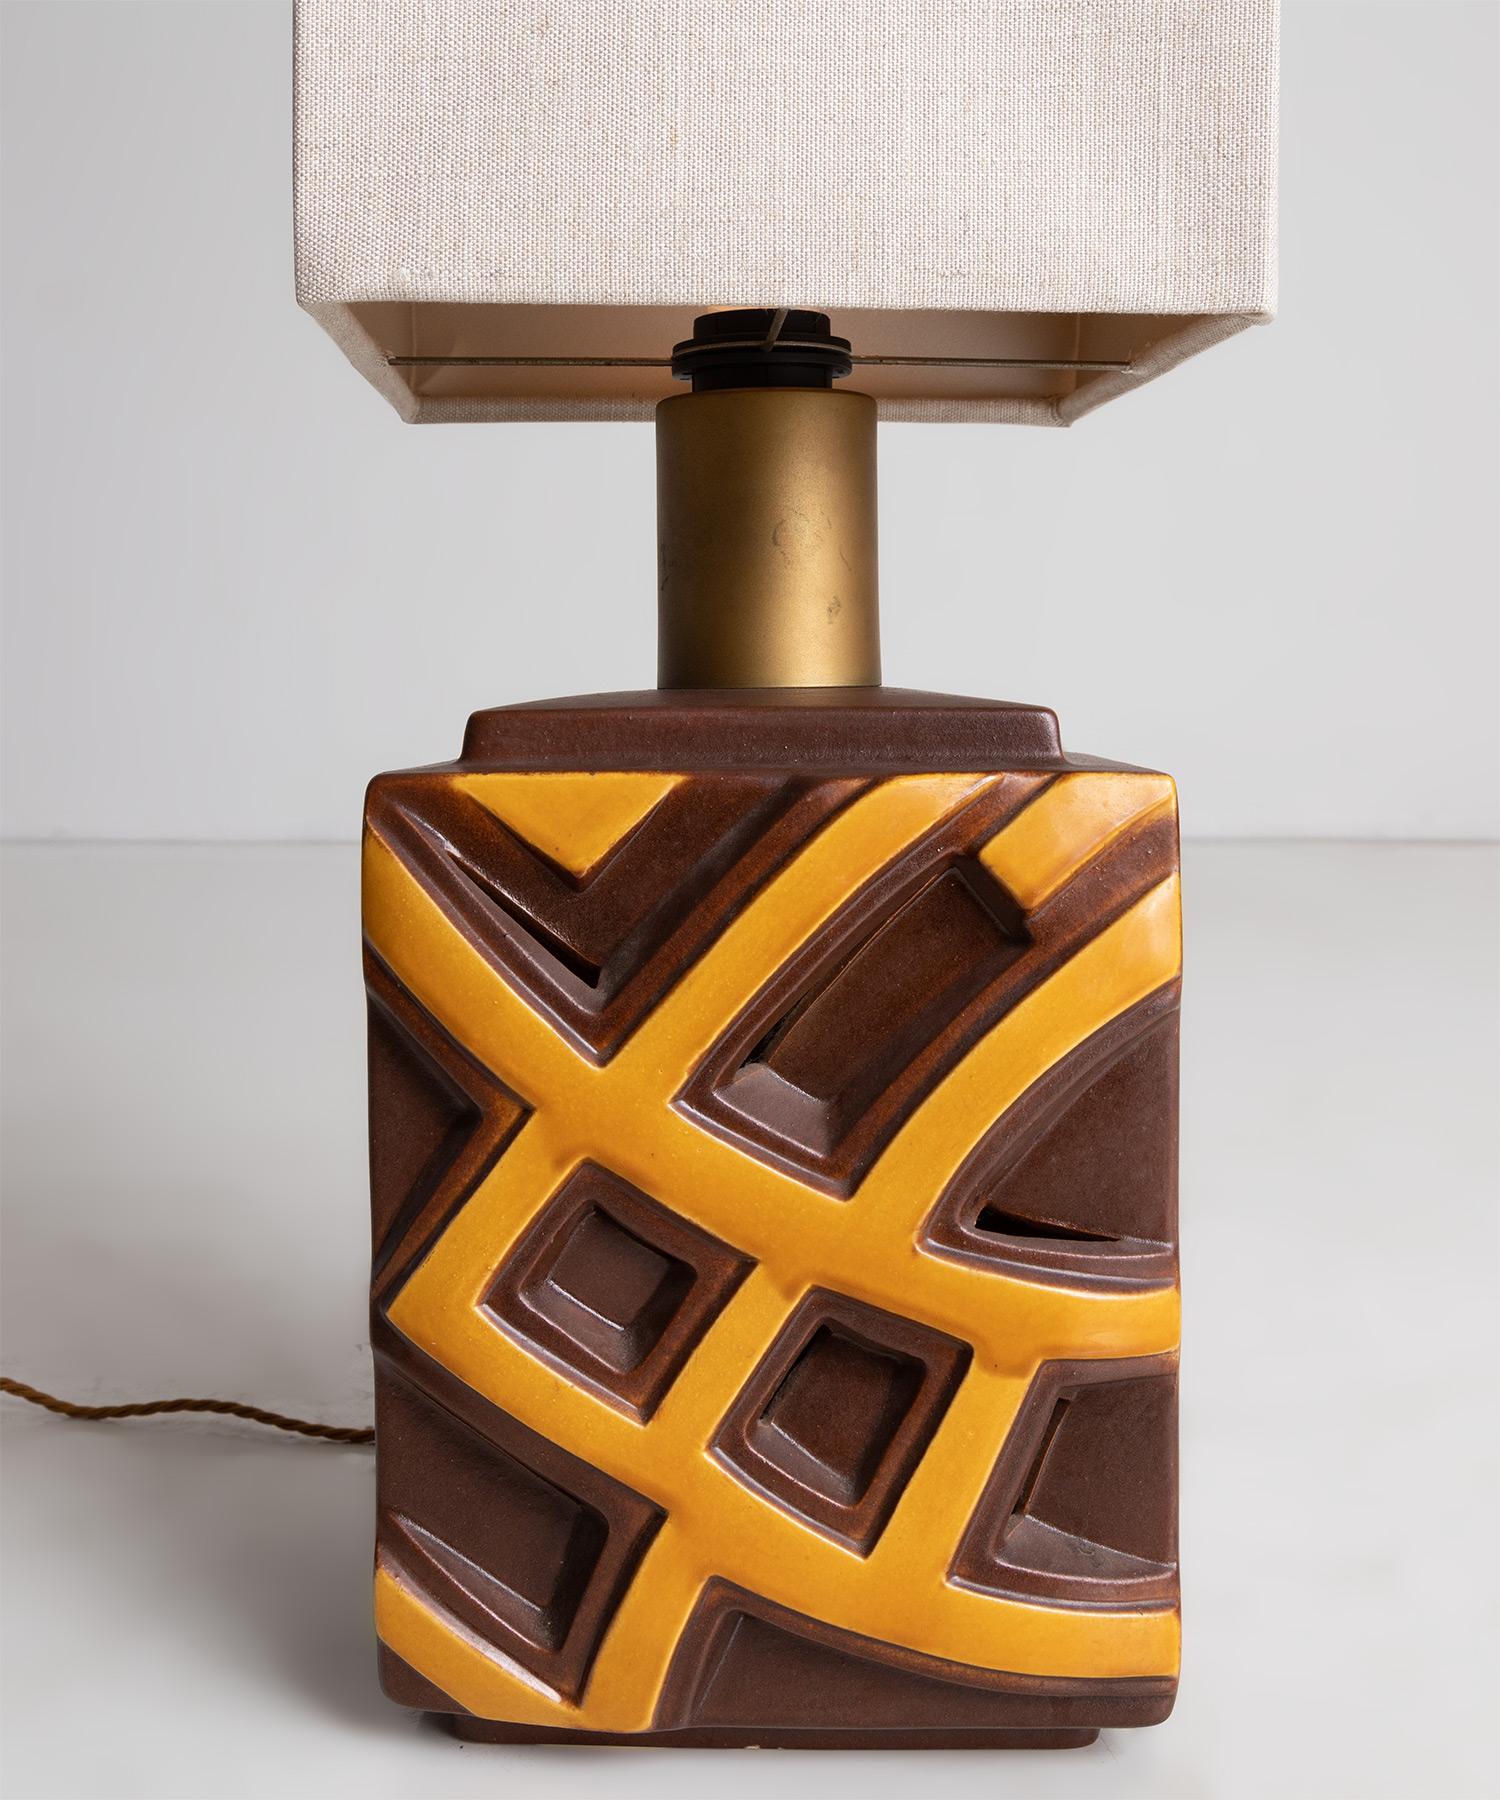 Hand-Crafted Tall Ceramic Lamp, France circa 1970 For Sale